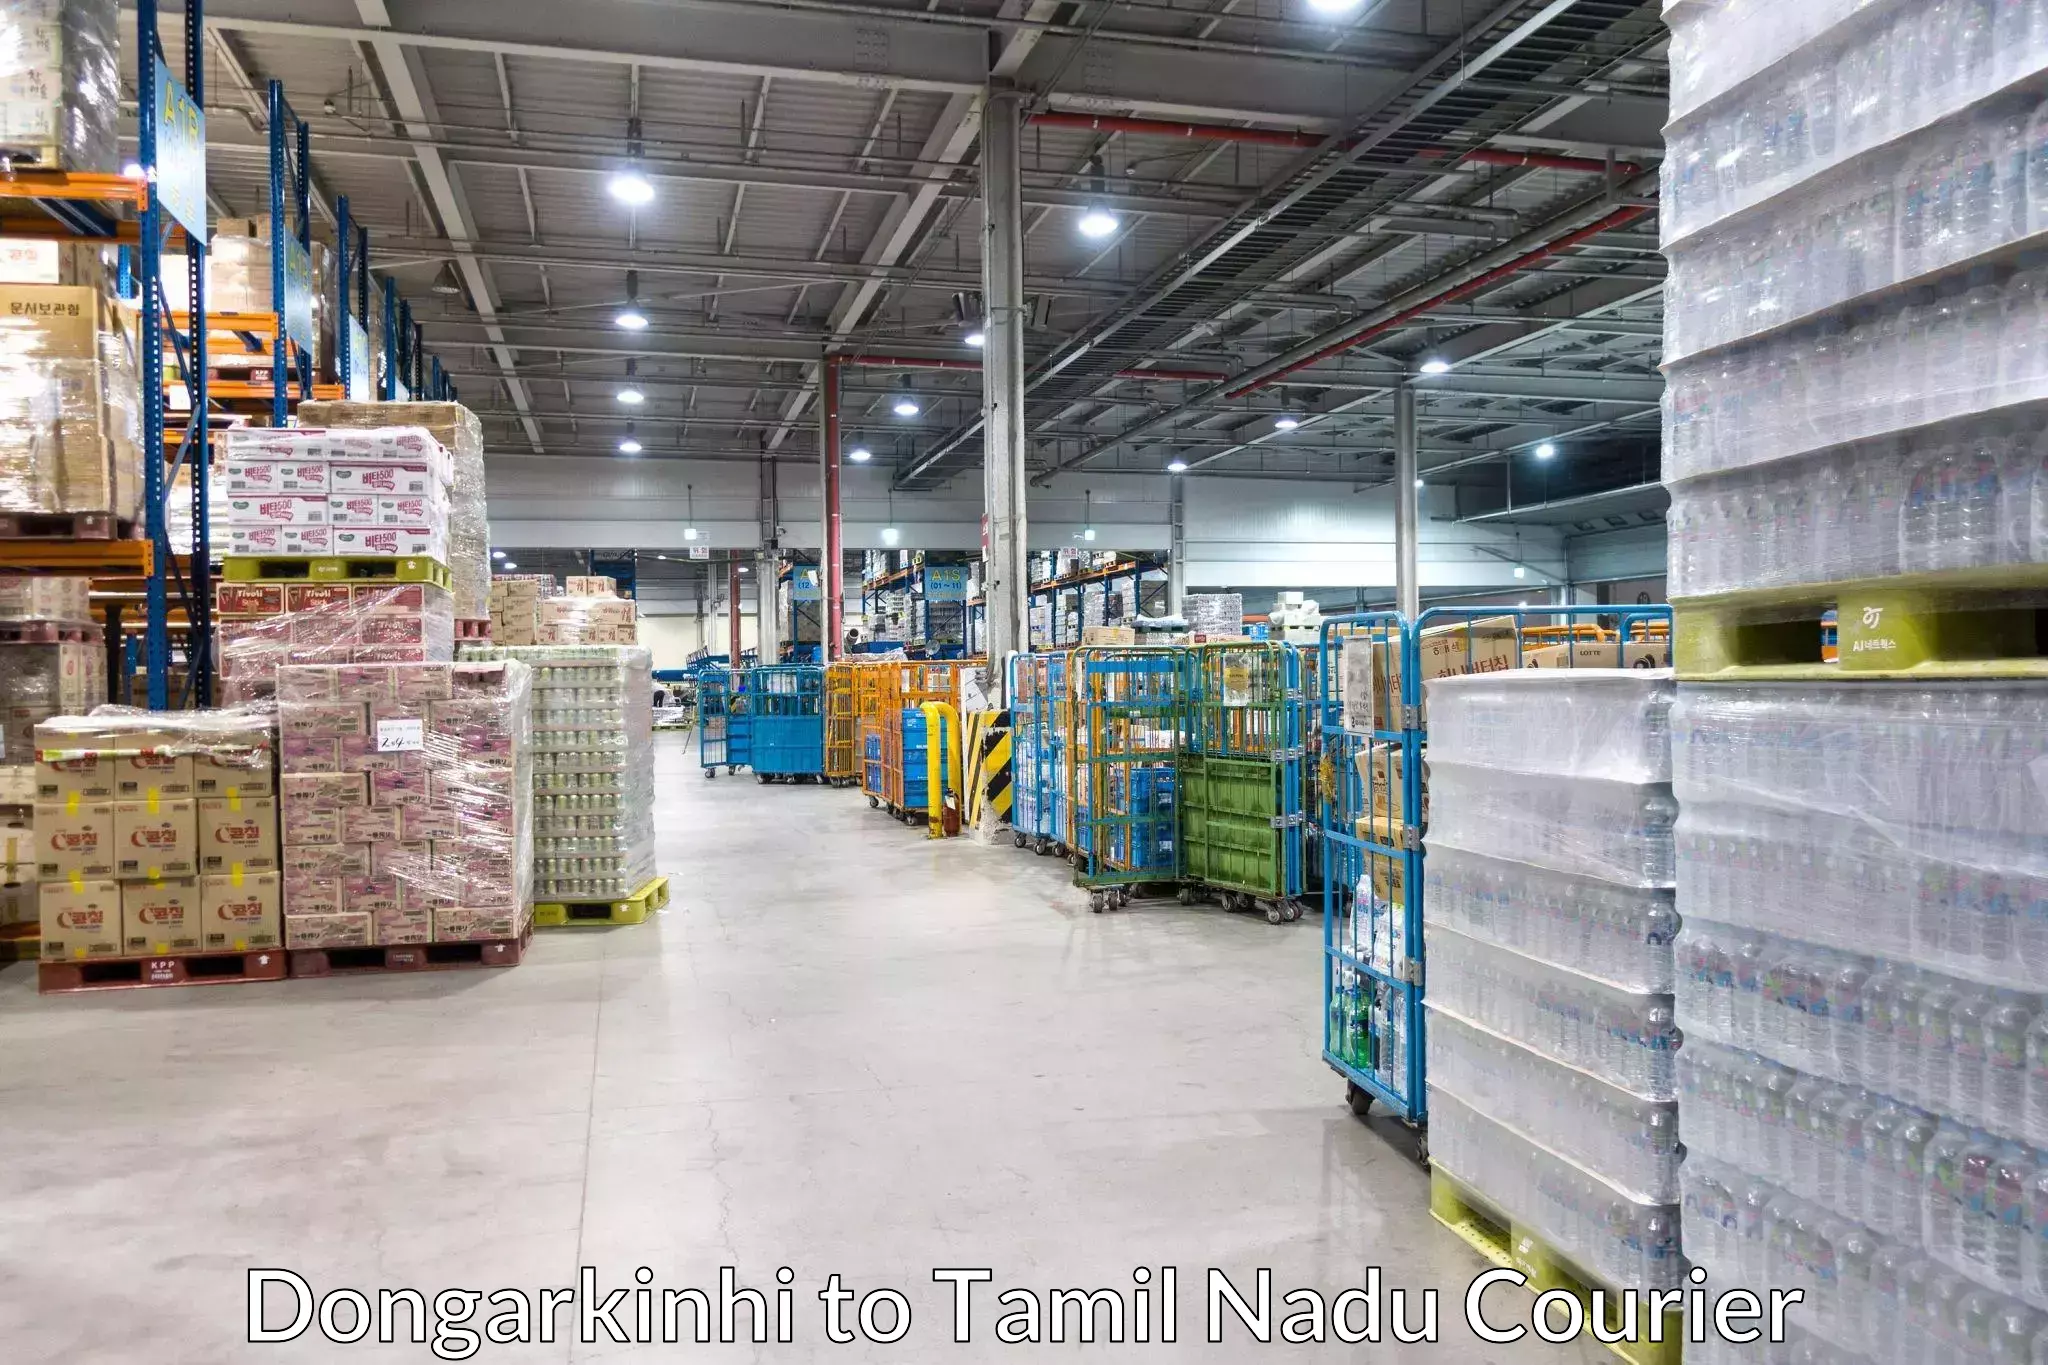 High-quality delivery services Dongarkinhi to Melmaruvathur